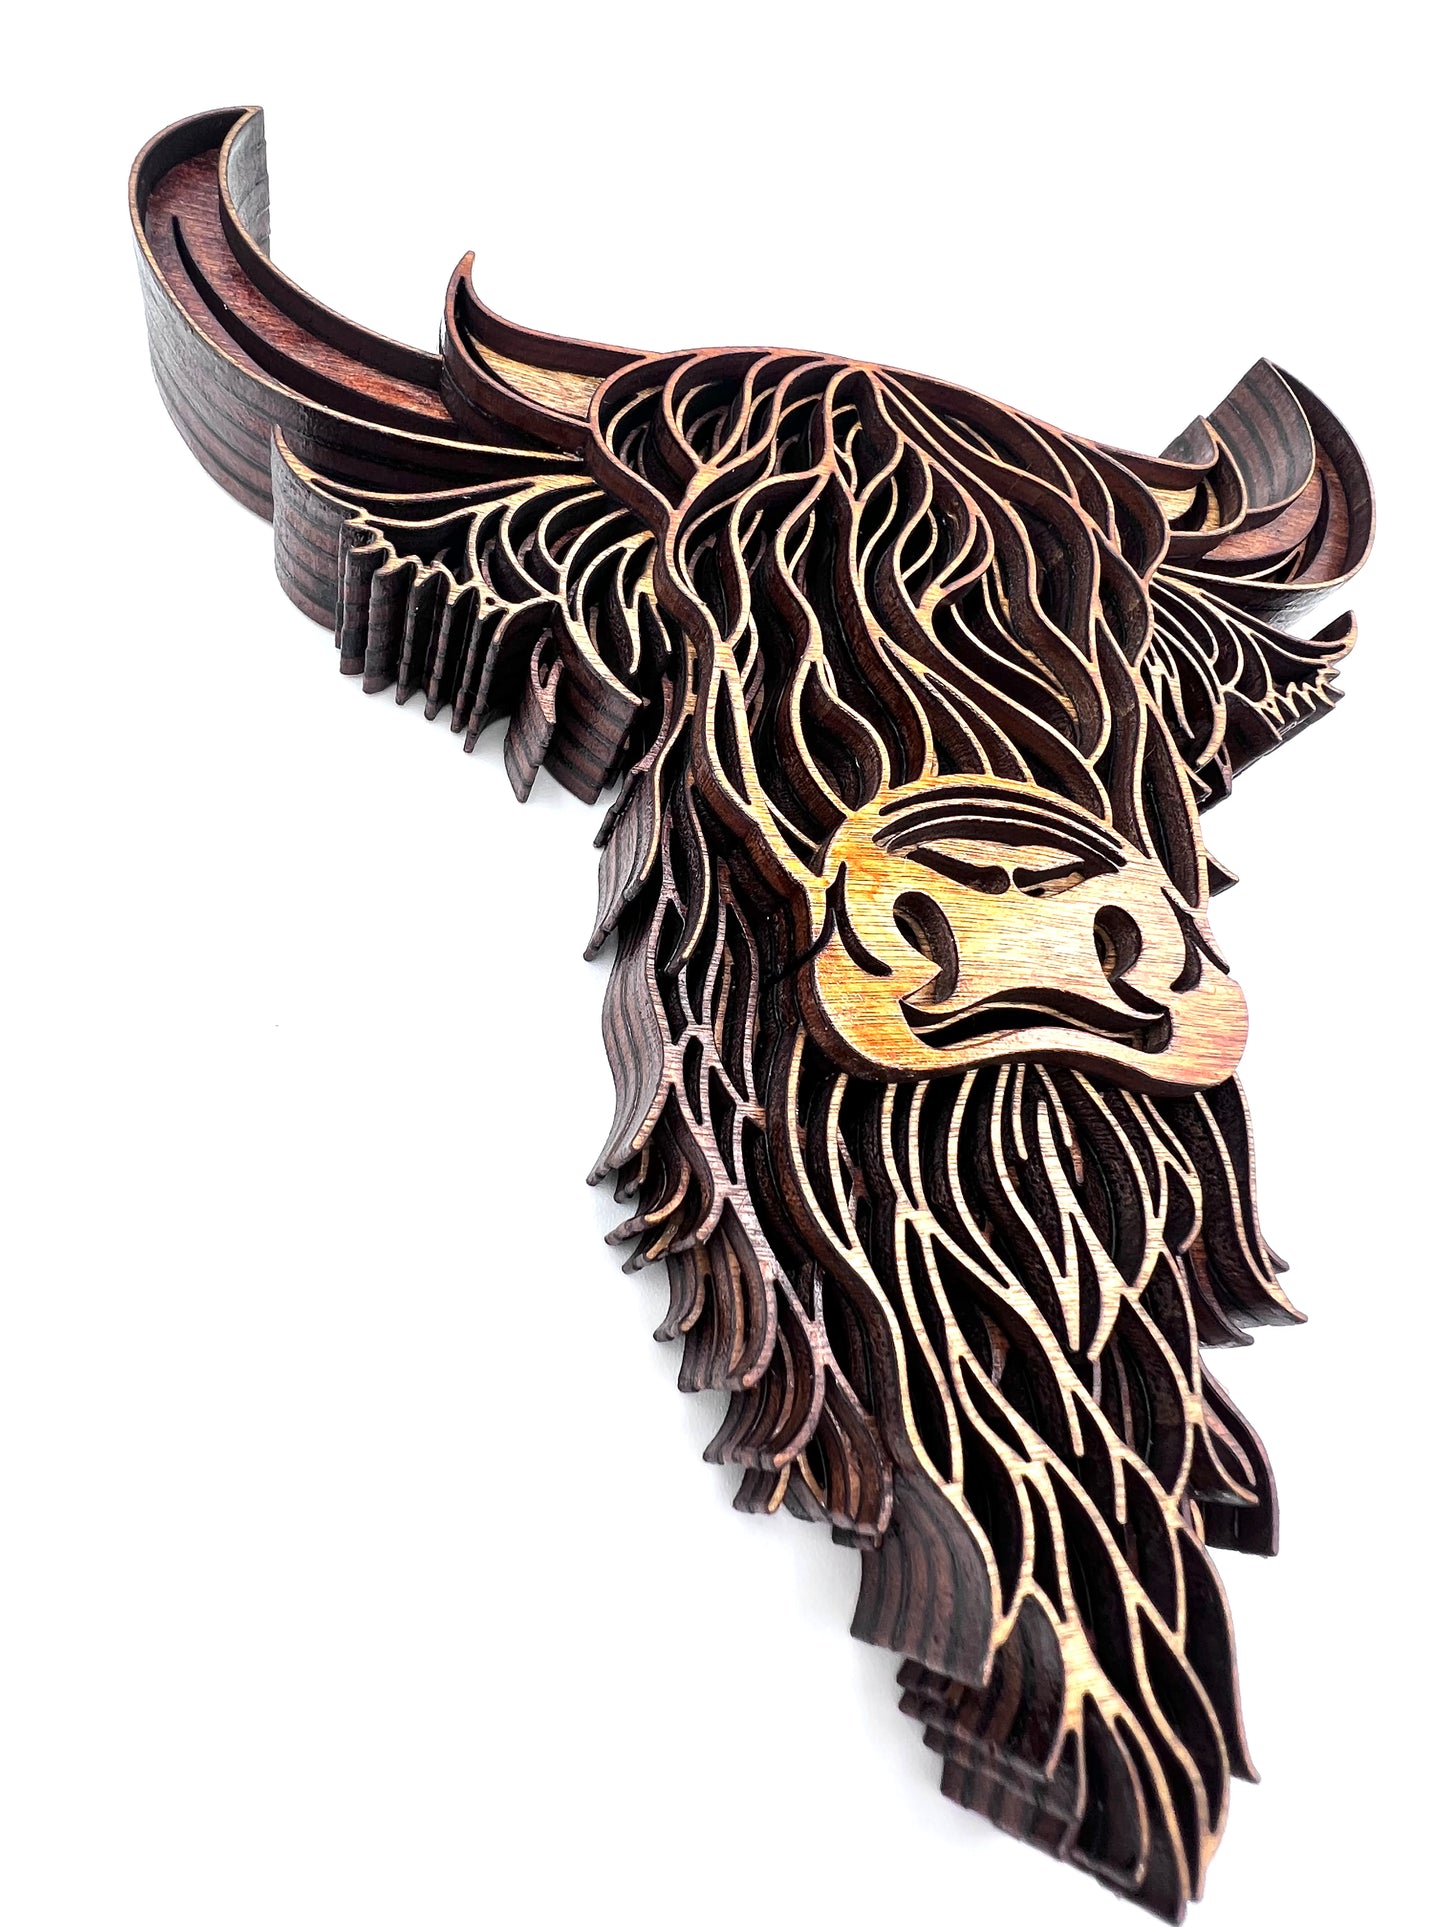 Highland Cow, Multi-Layer Wood